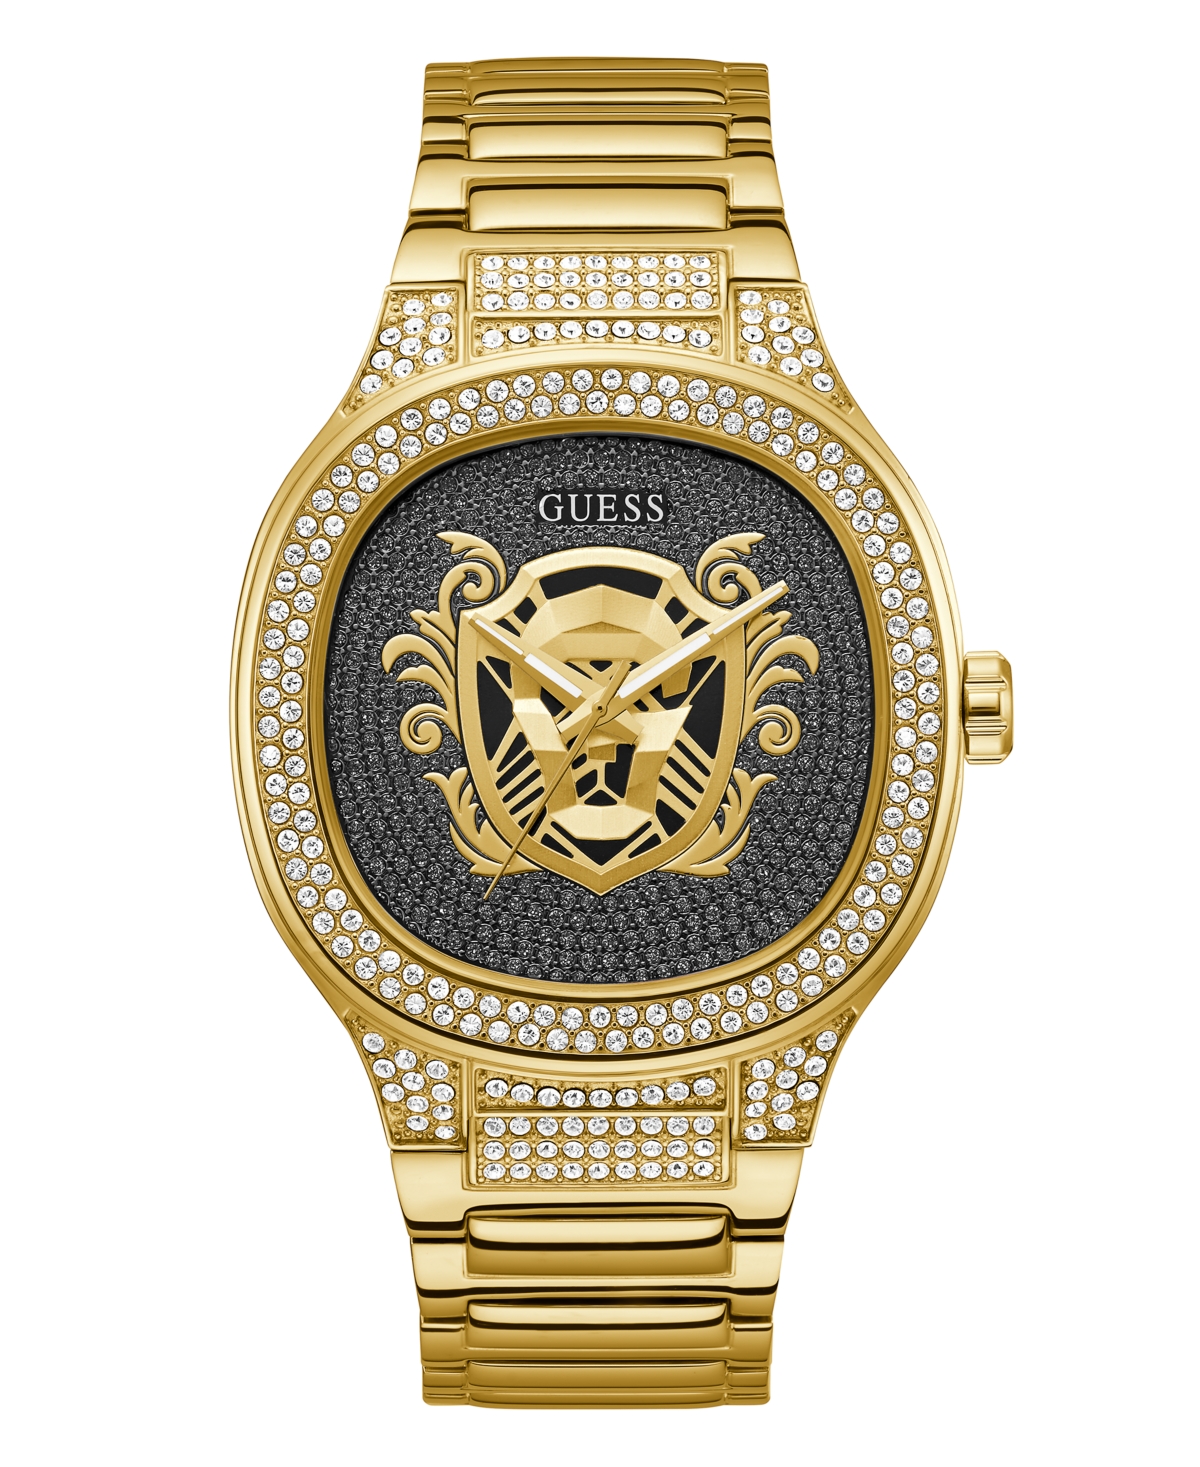 Guess Men's Analog Gold-tone Stainless Steel Watch 45mm In Gold Tone